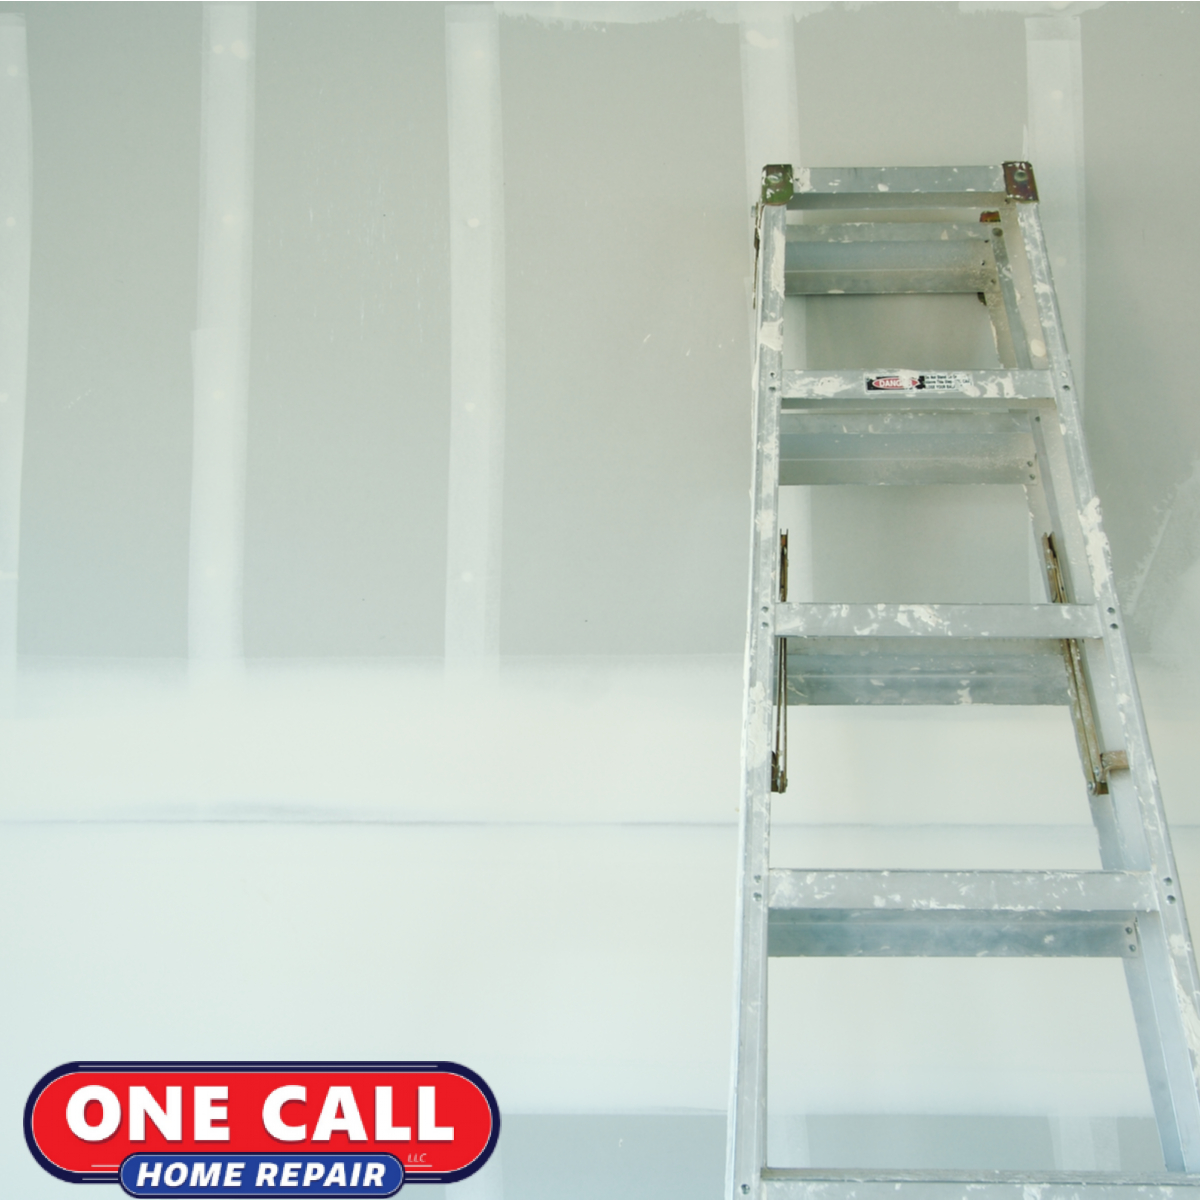 One Home Call Repair Creates a Solid Foundation for Your Home’s Ceilings and Walls!